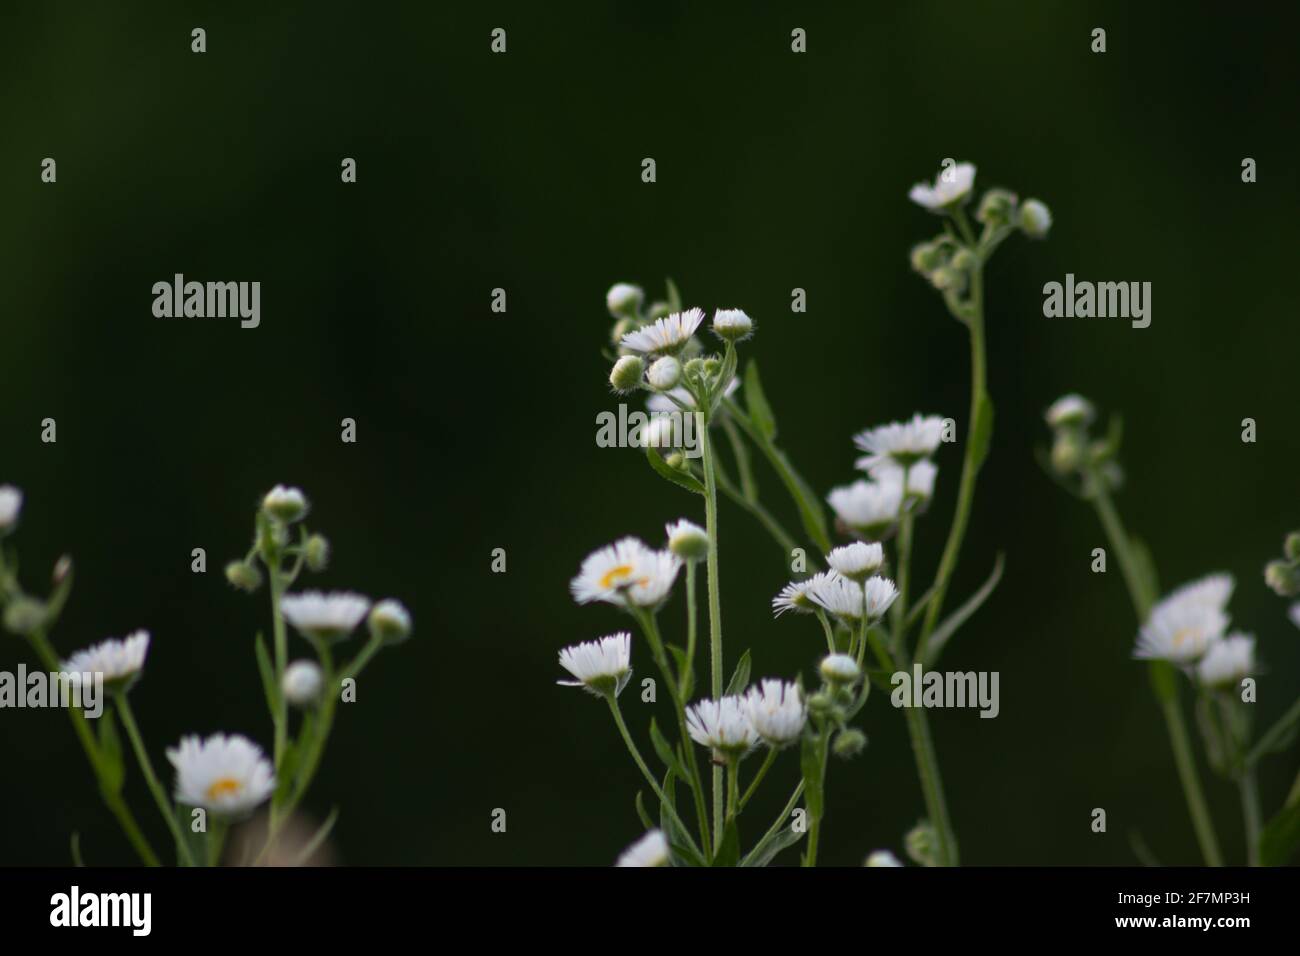 White daisy flower in green background, Italy  Stock Photo